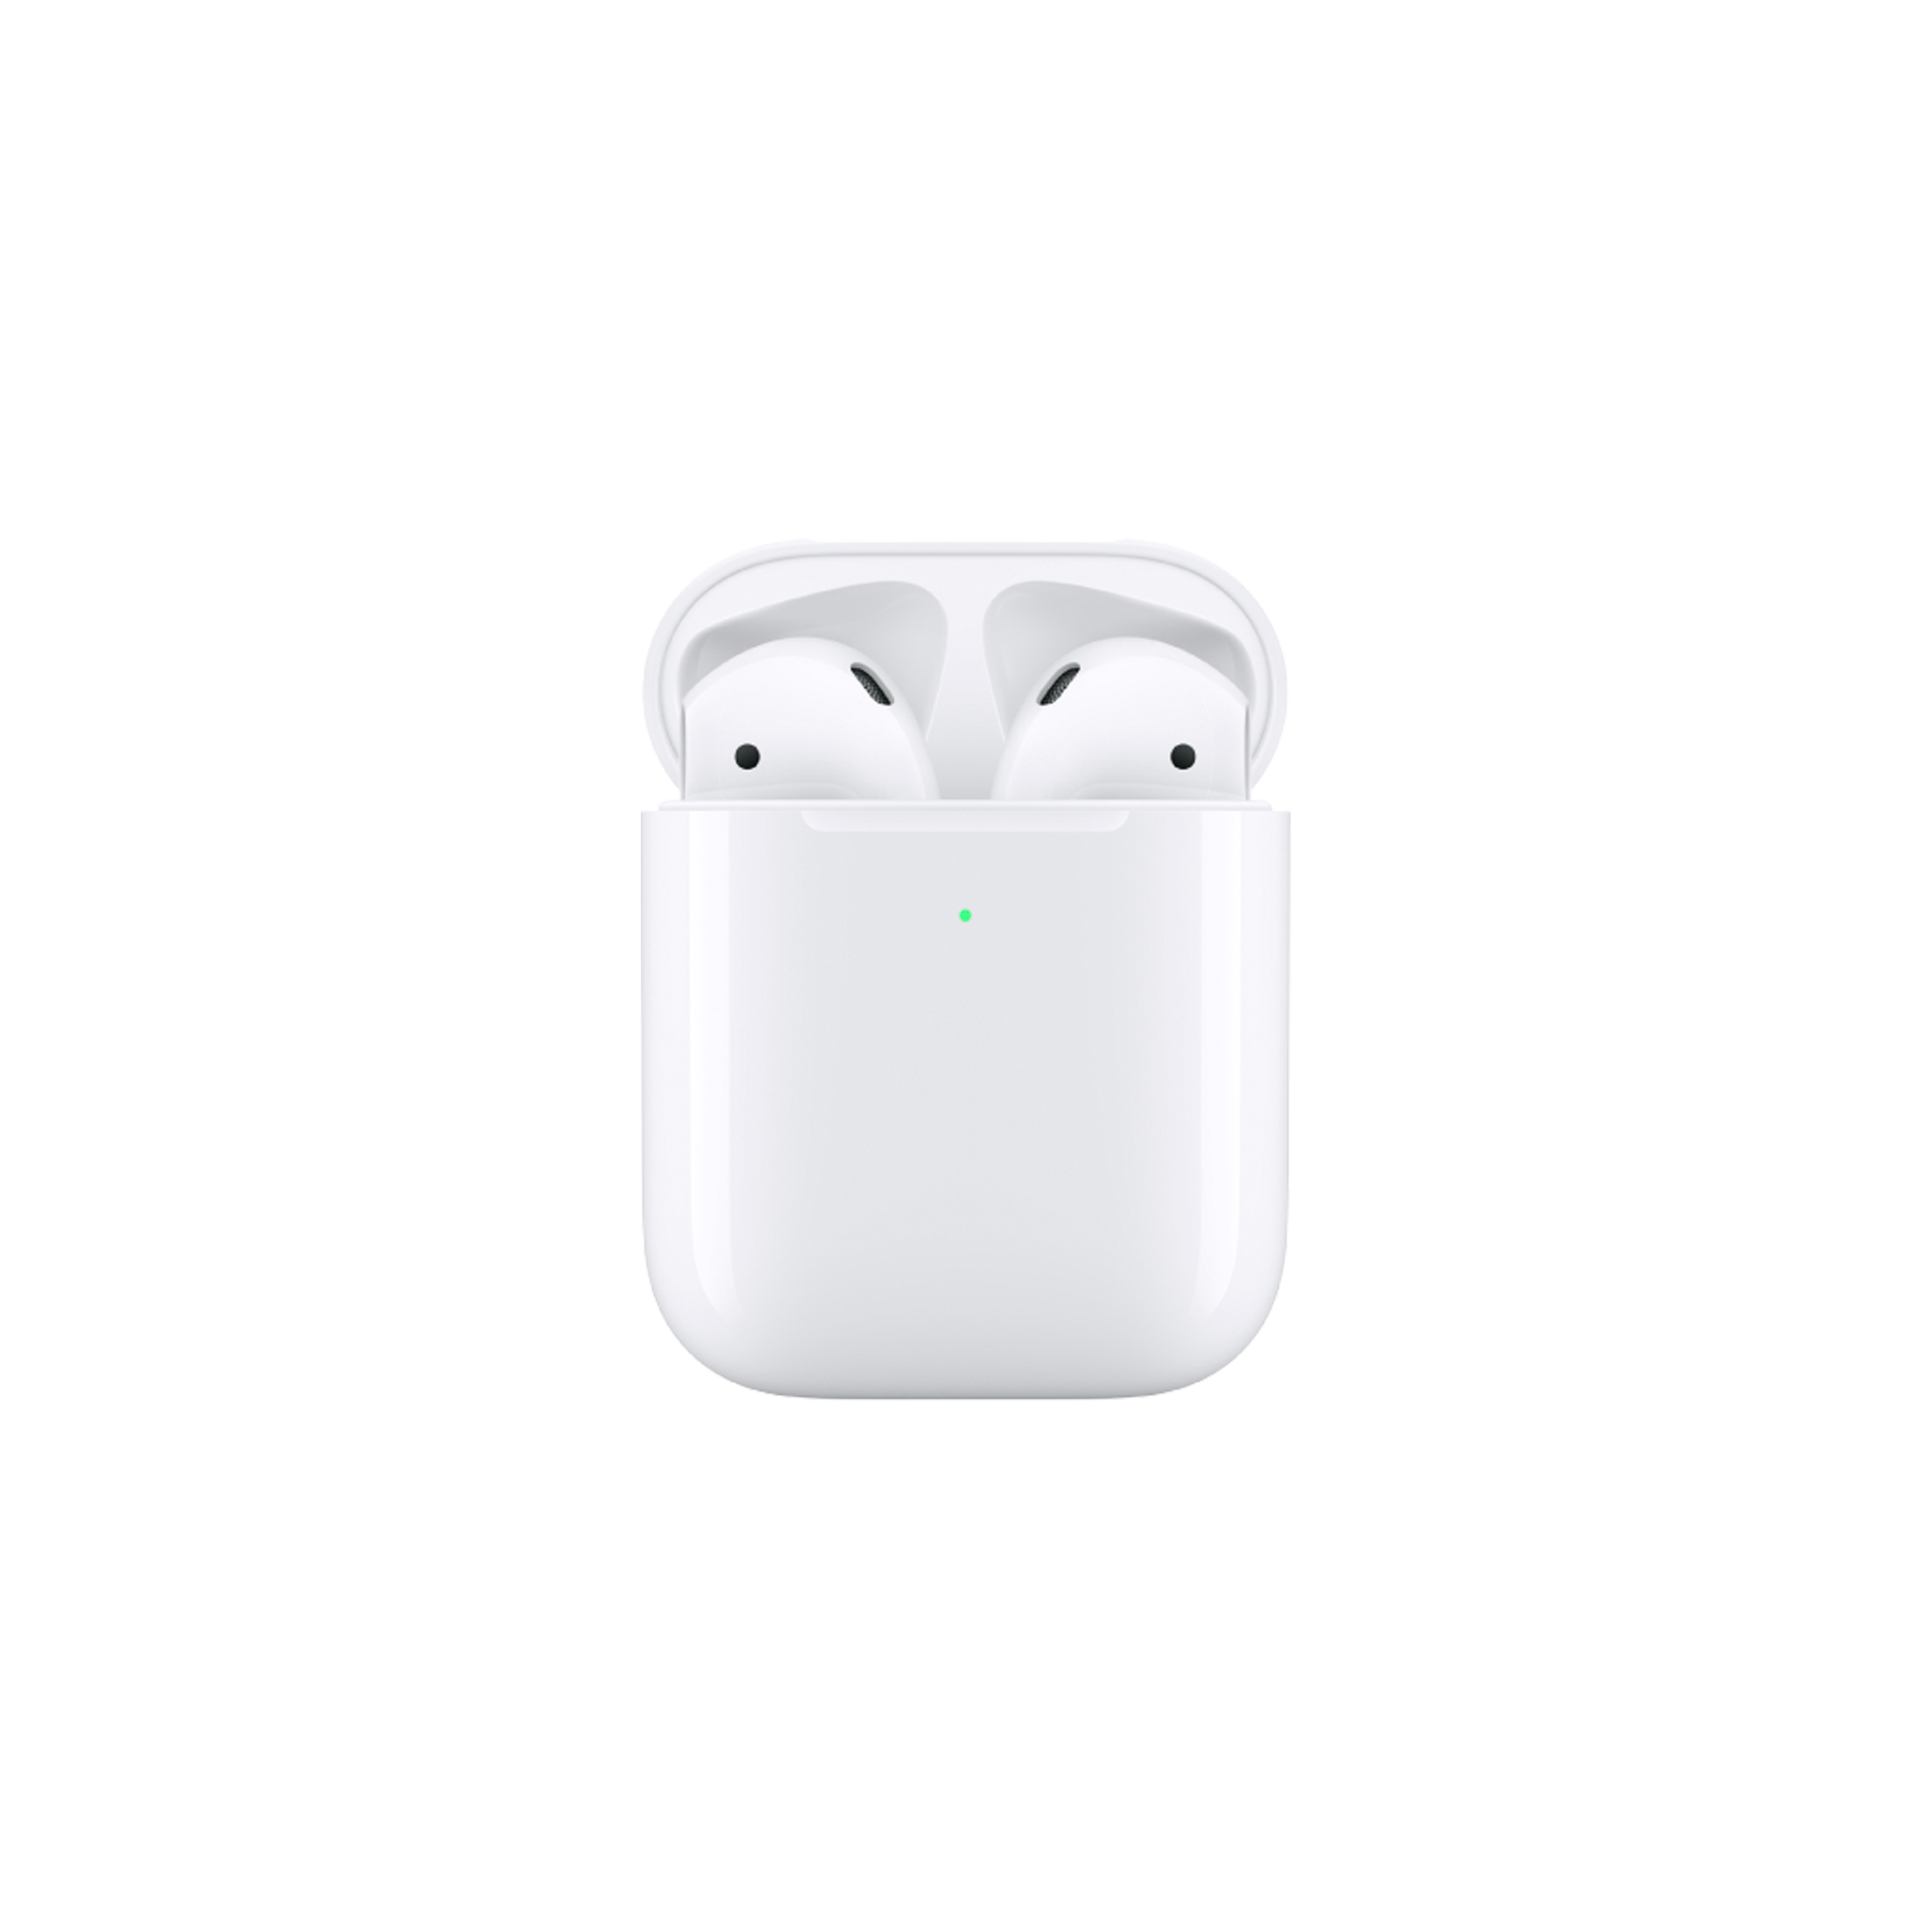 Apple Airpods 2 generation